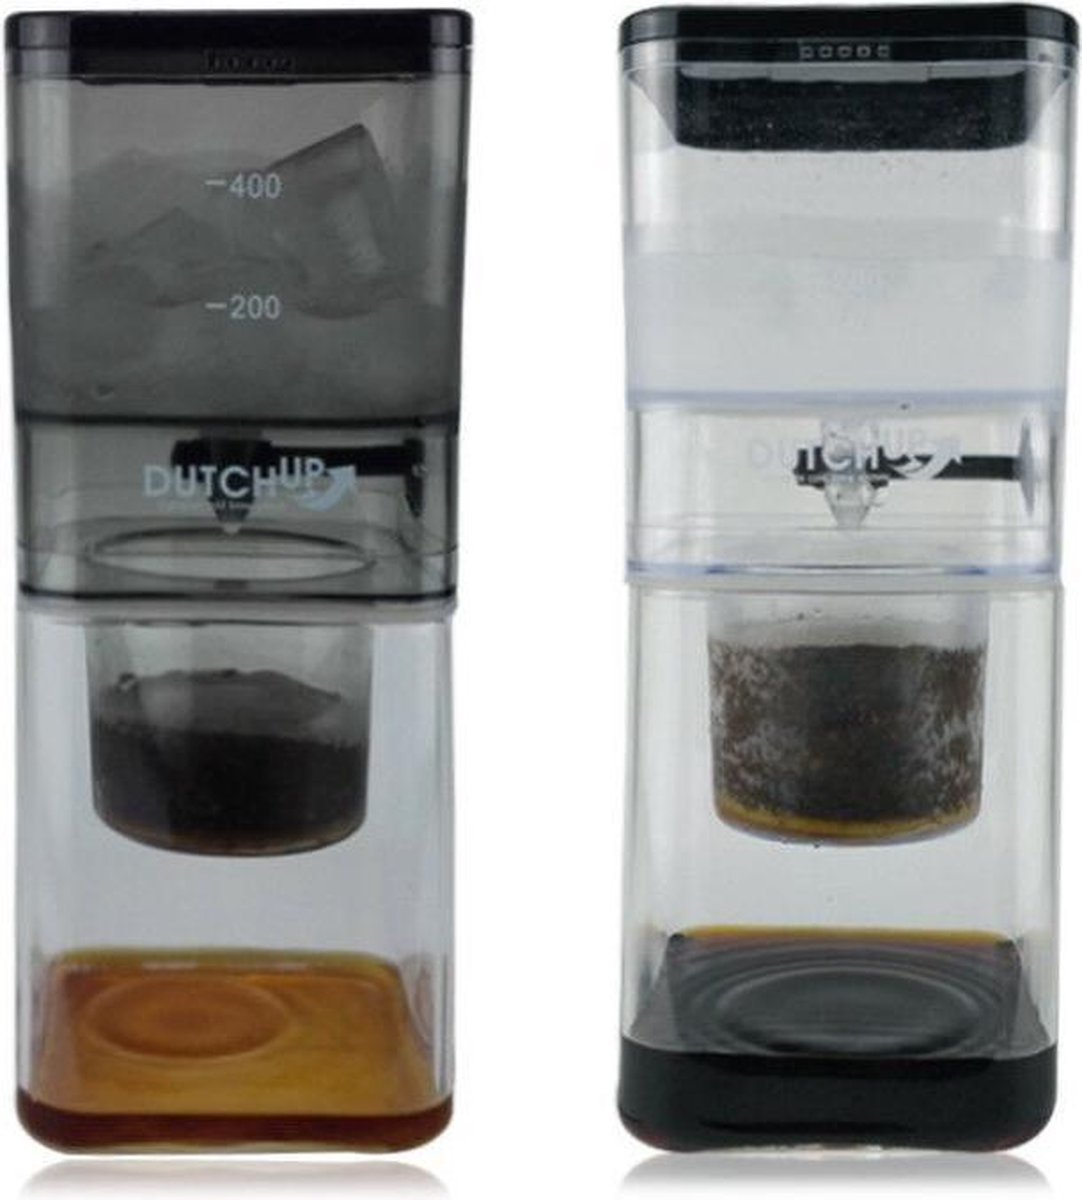 DutchUp Glass Cold Brew Glass Carafe Coffee Maker cold drip coffee maker - 500ml